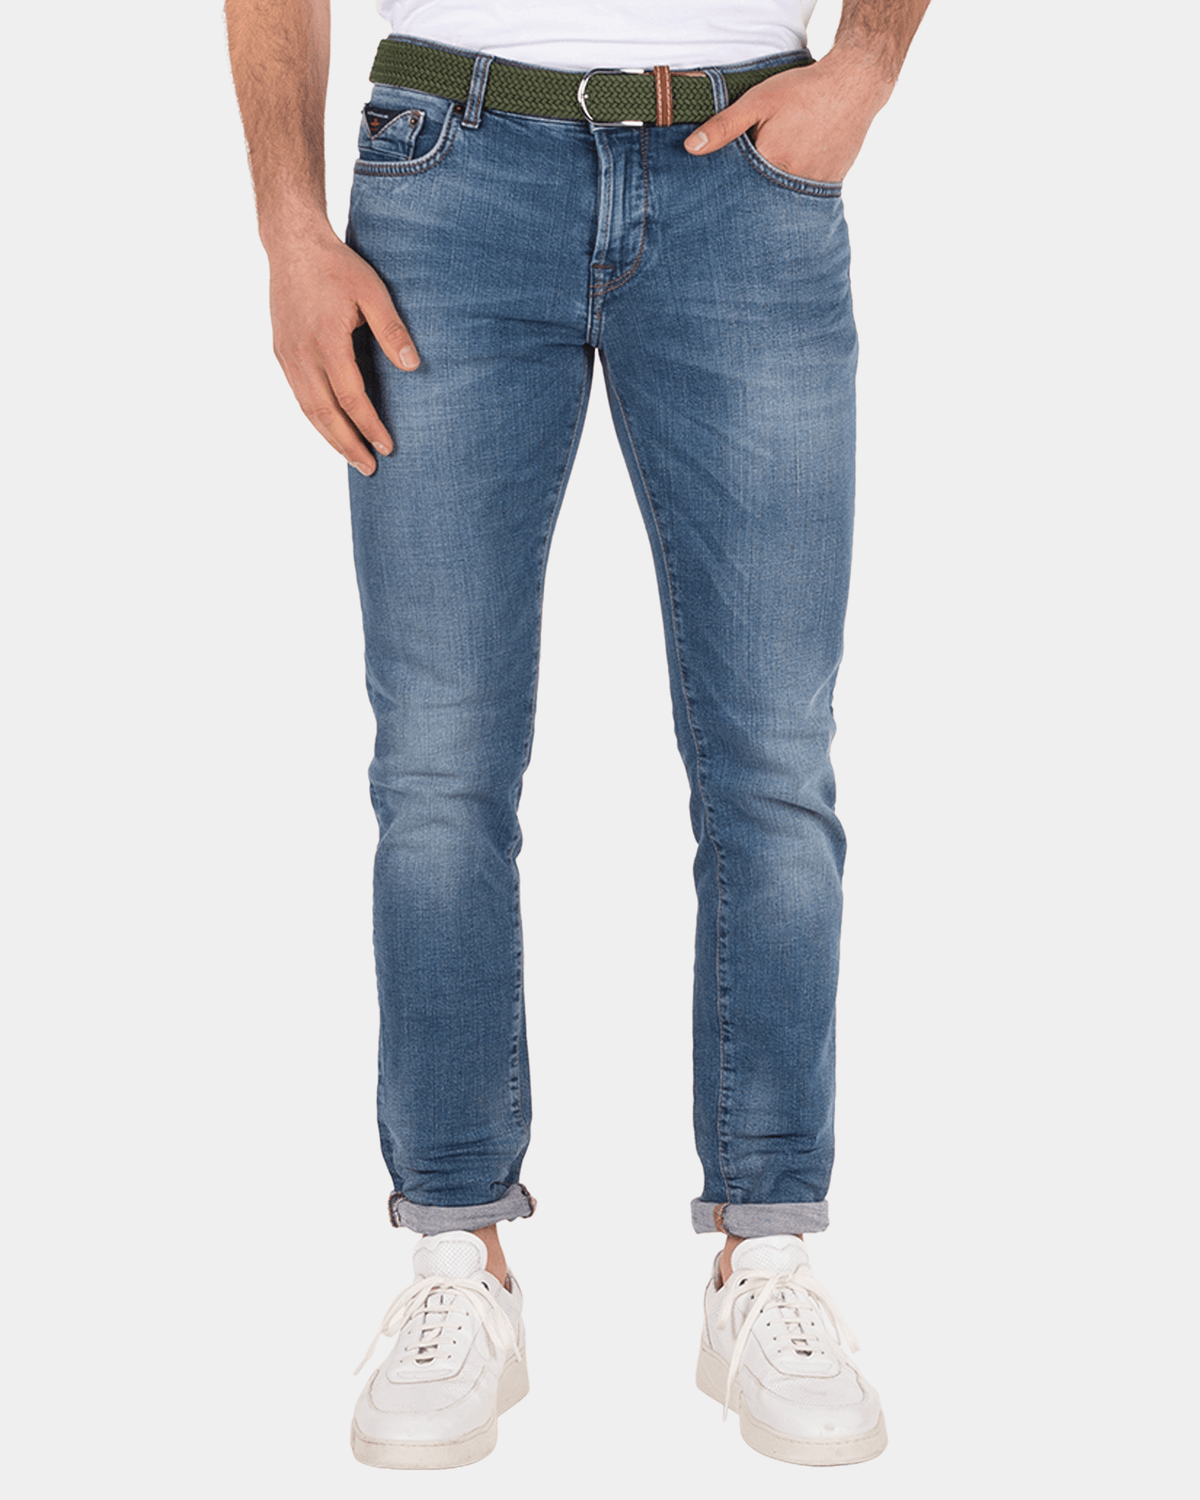 Nelson Jeans - Light Stone | NZA New Zealand Auckland